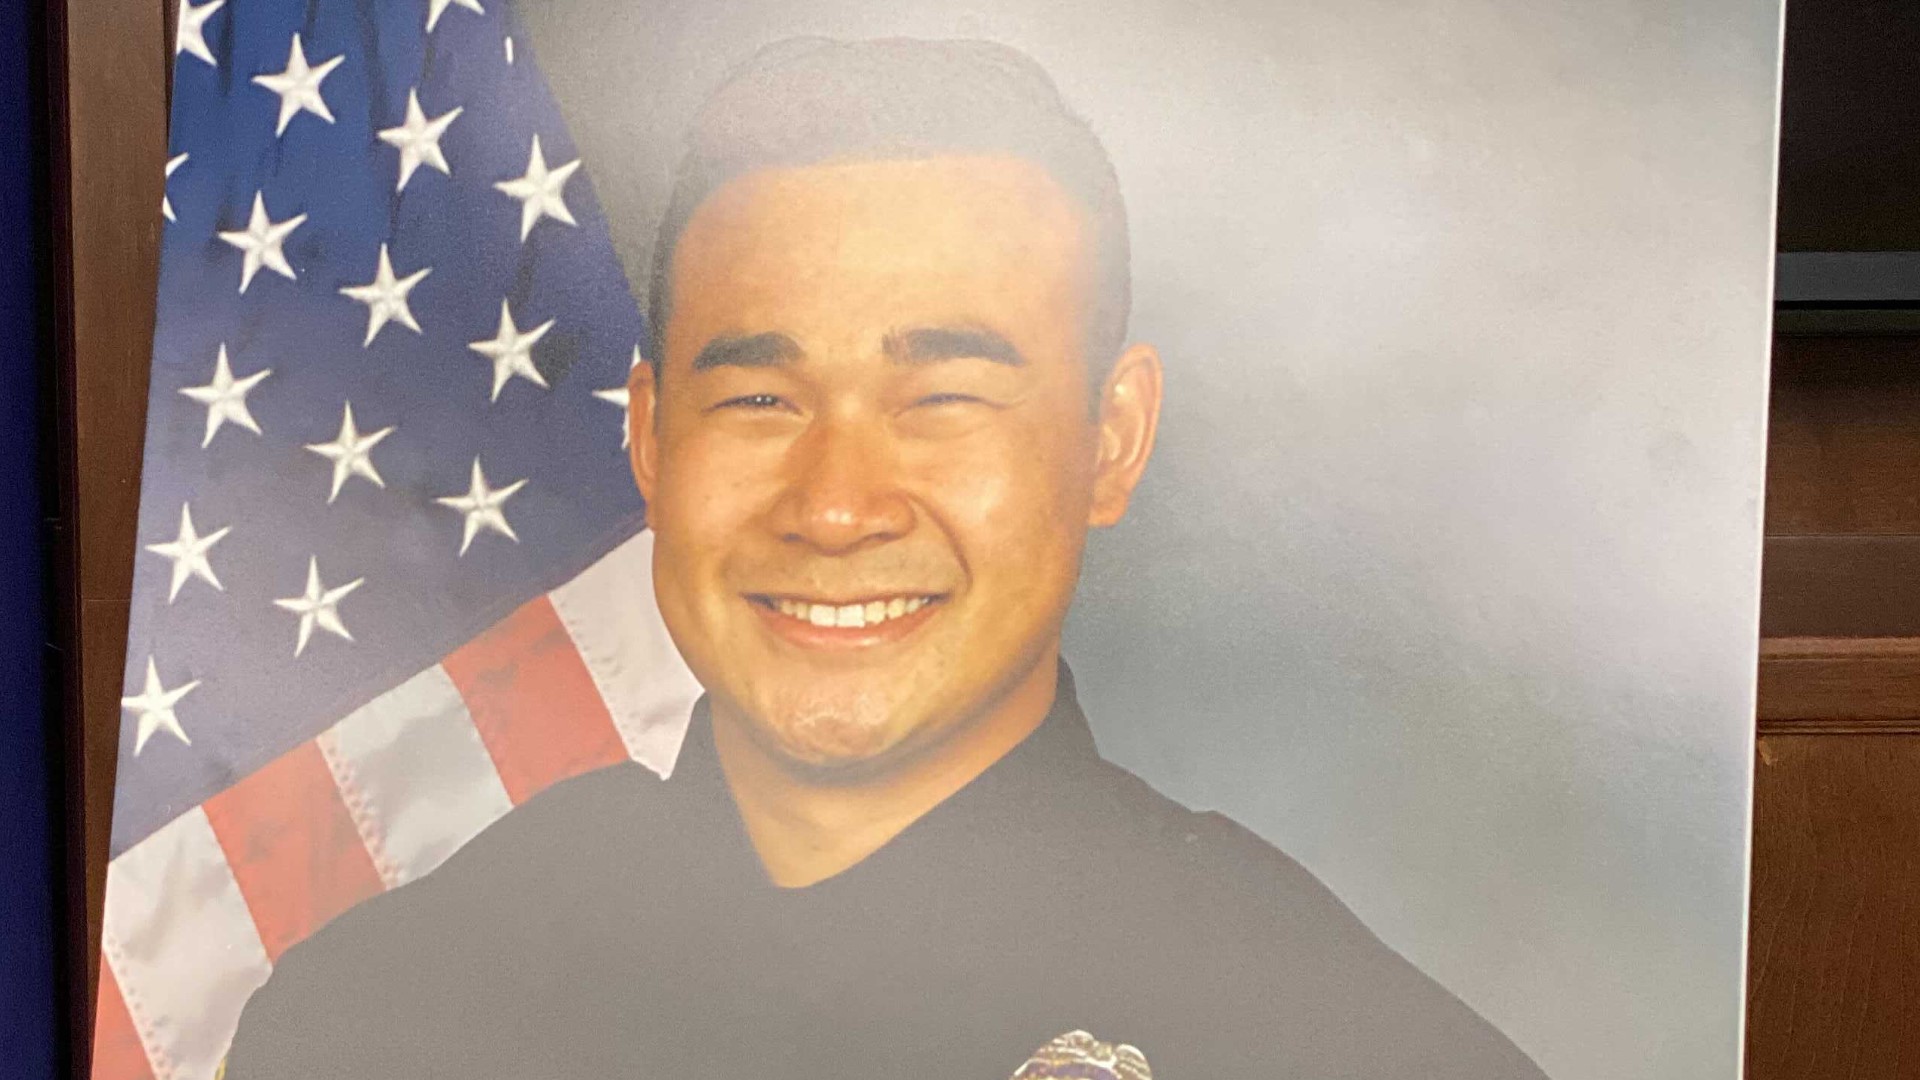 The family of a Stockton police officer, killed while responding to a reported domestic violence incident, are remembering him as caring and loving.